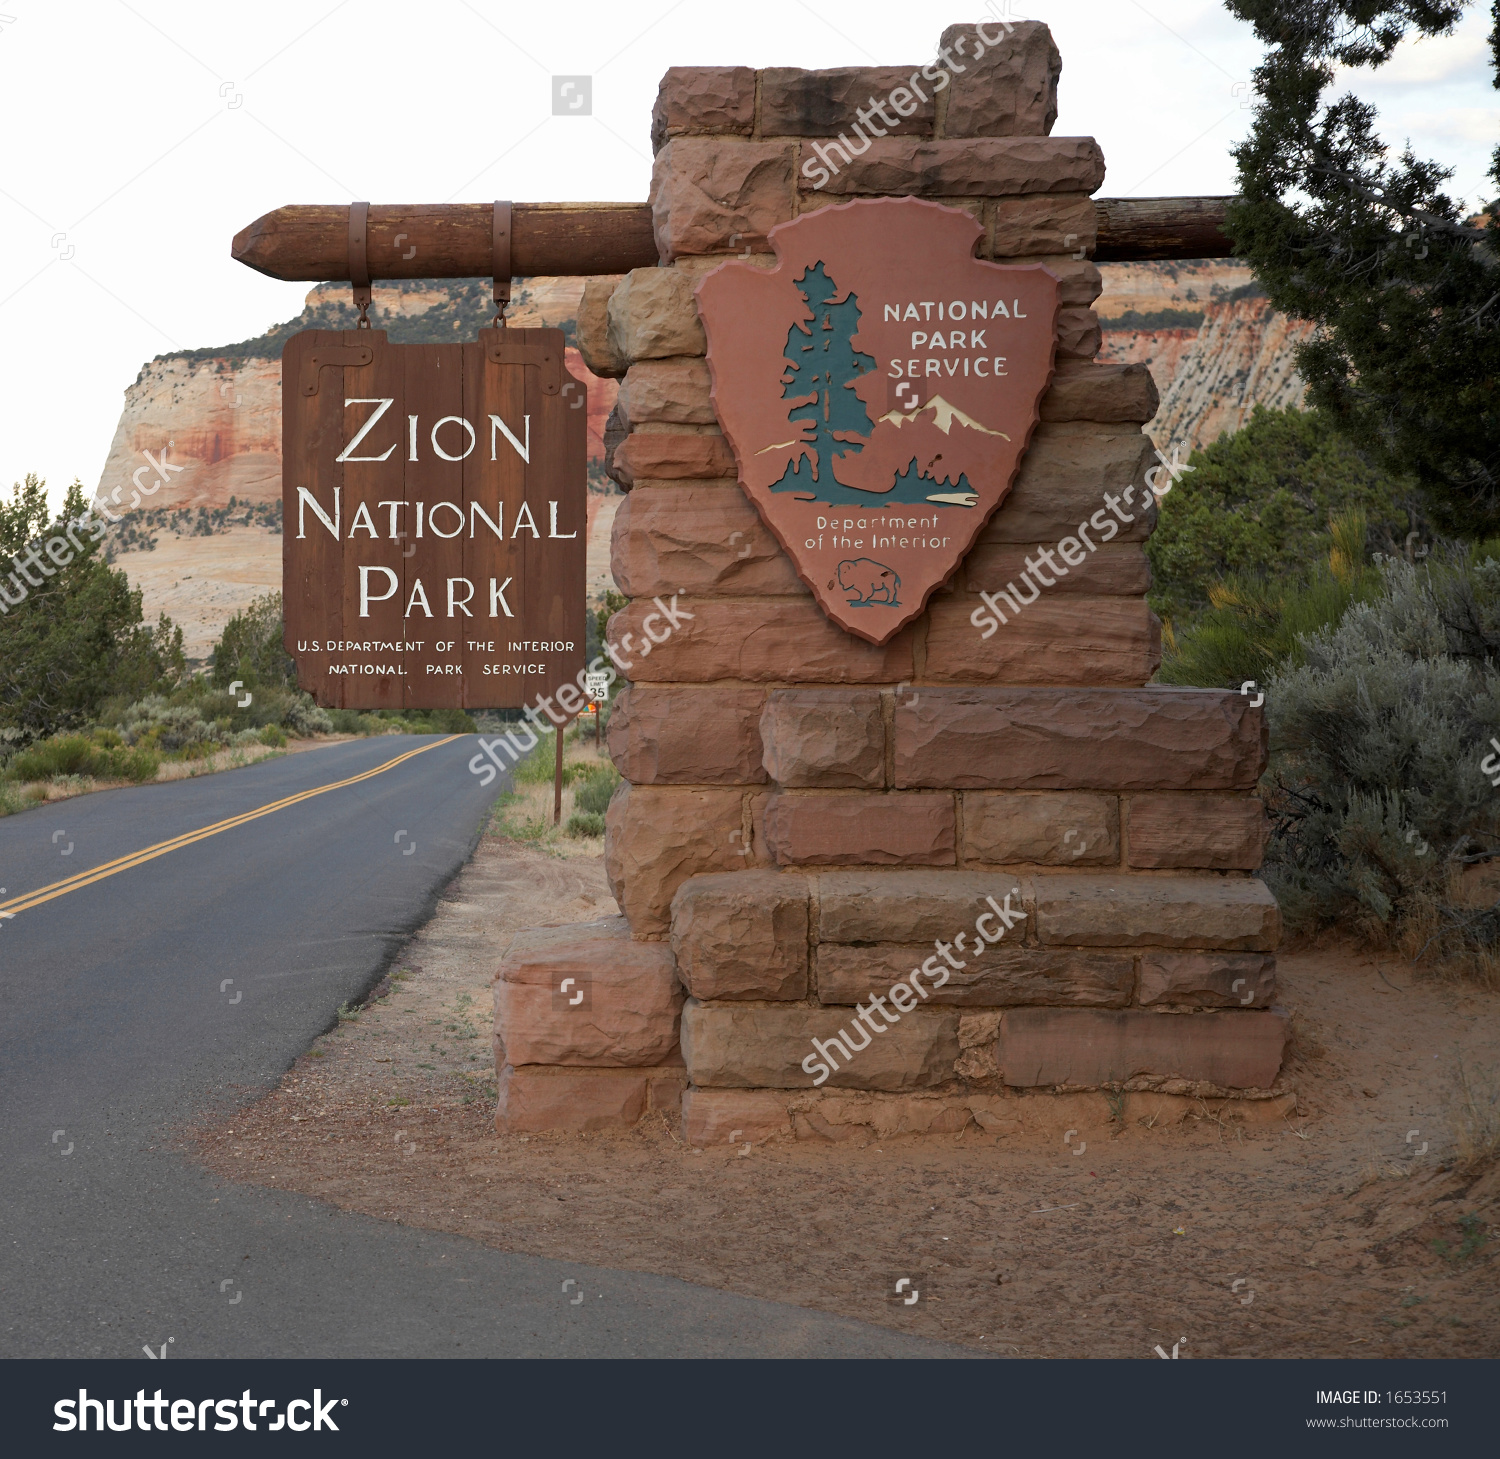 Zion National Park clipart #1, Download drawings